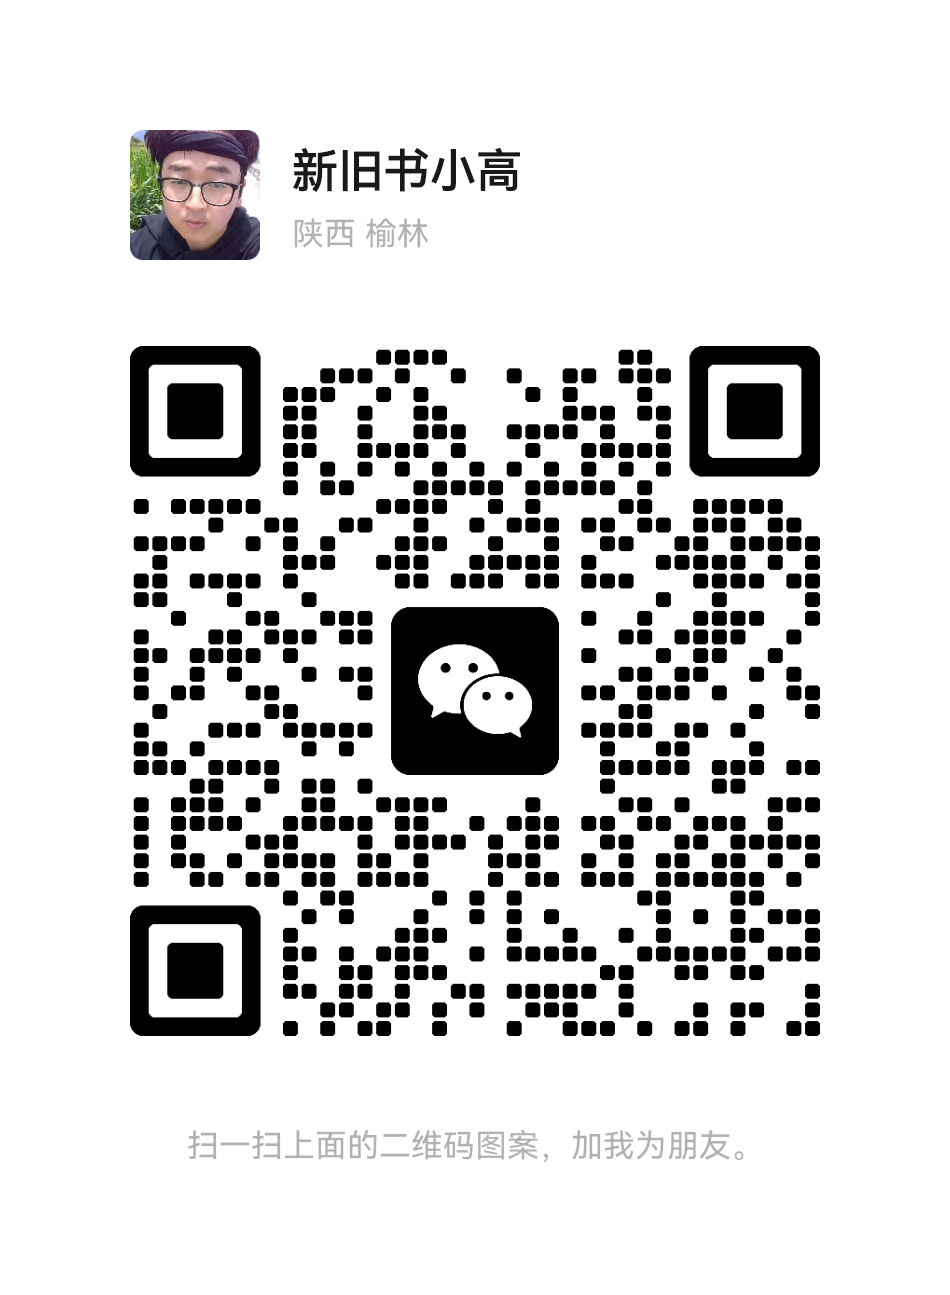 mmqrcode1678260677473.png